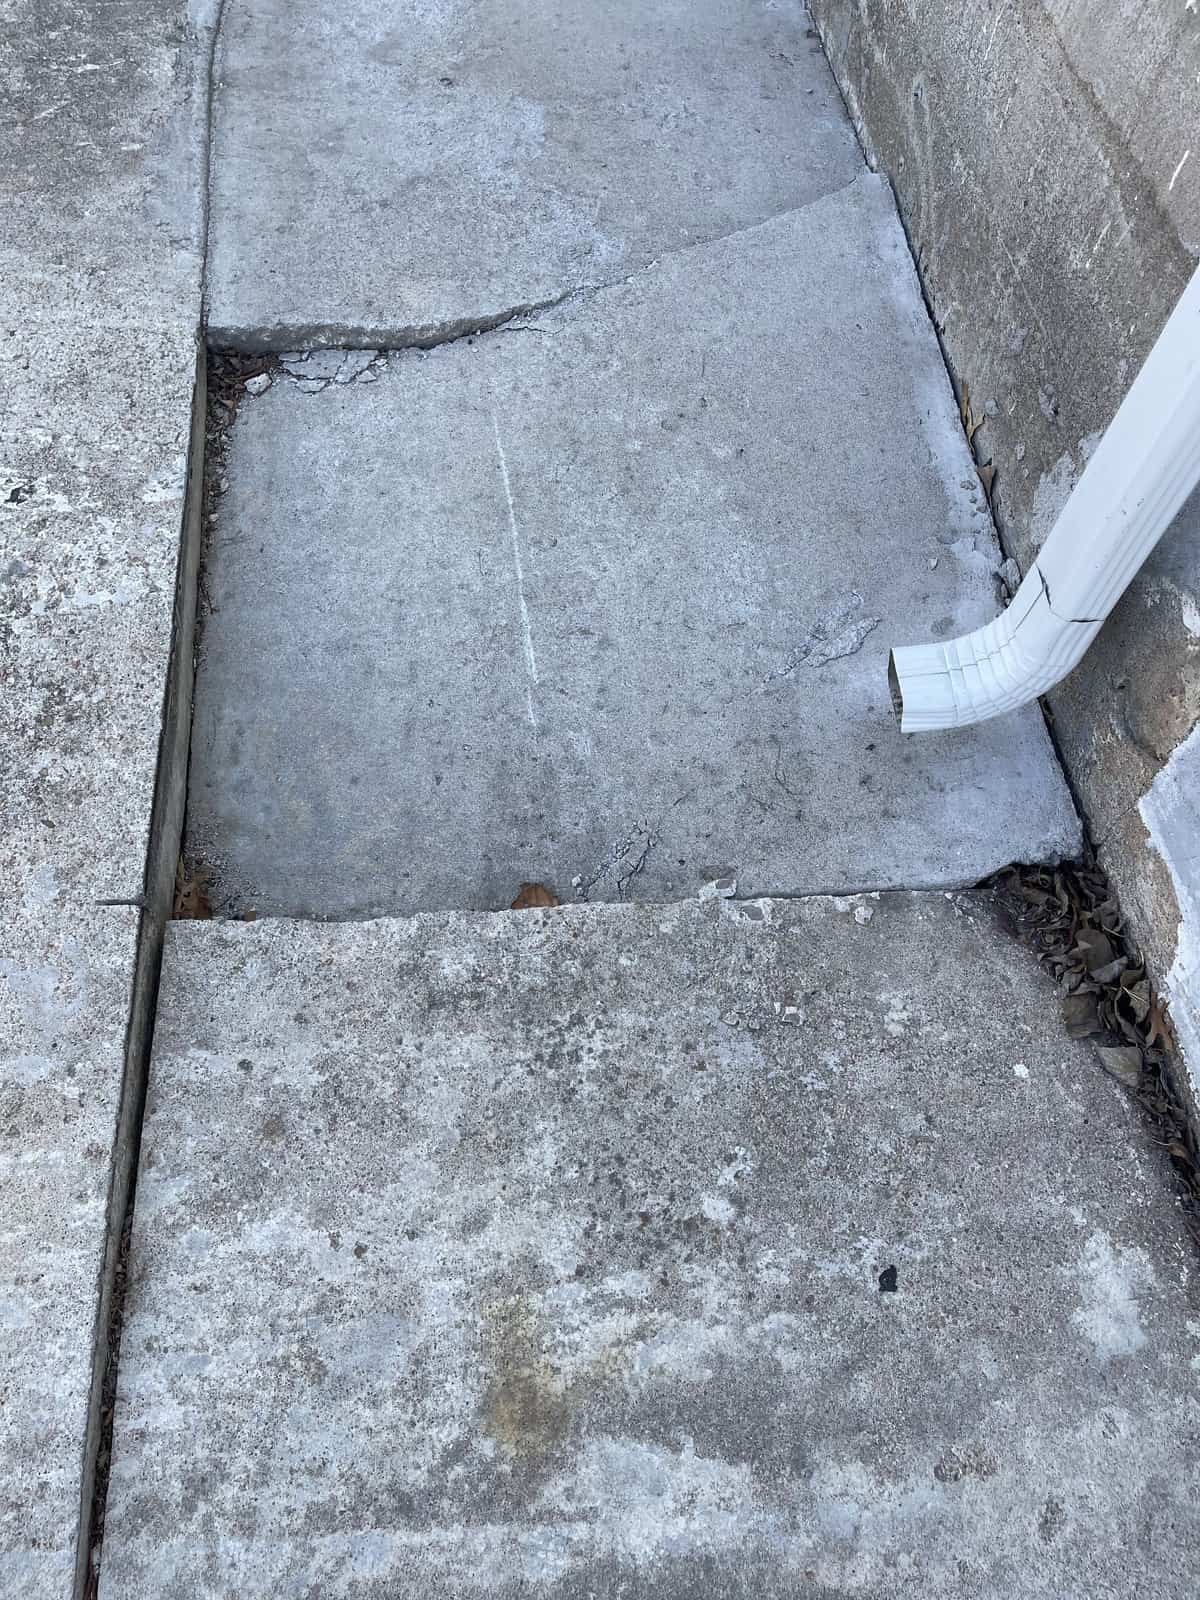 broken concrete from water damage from downspout